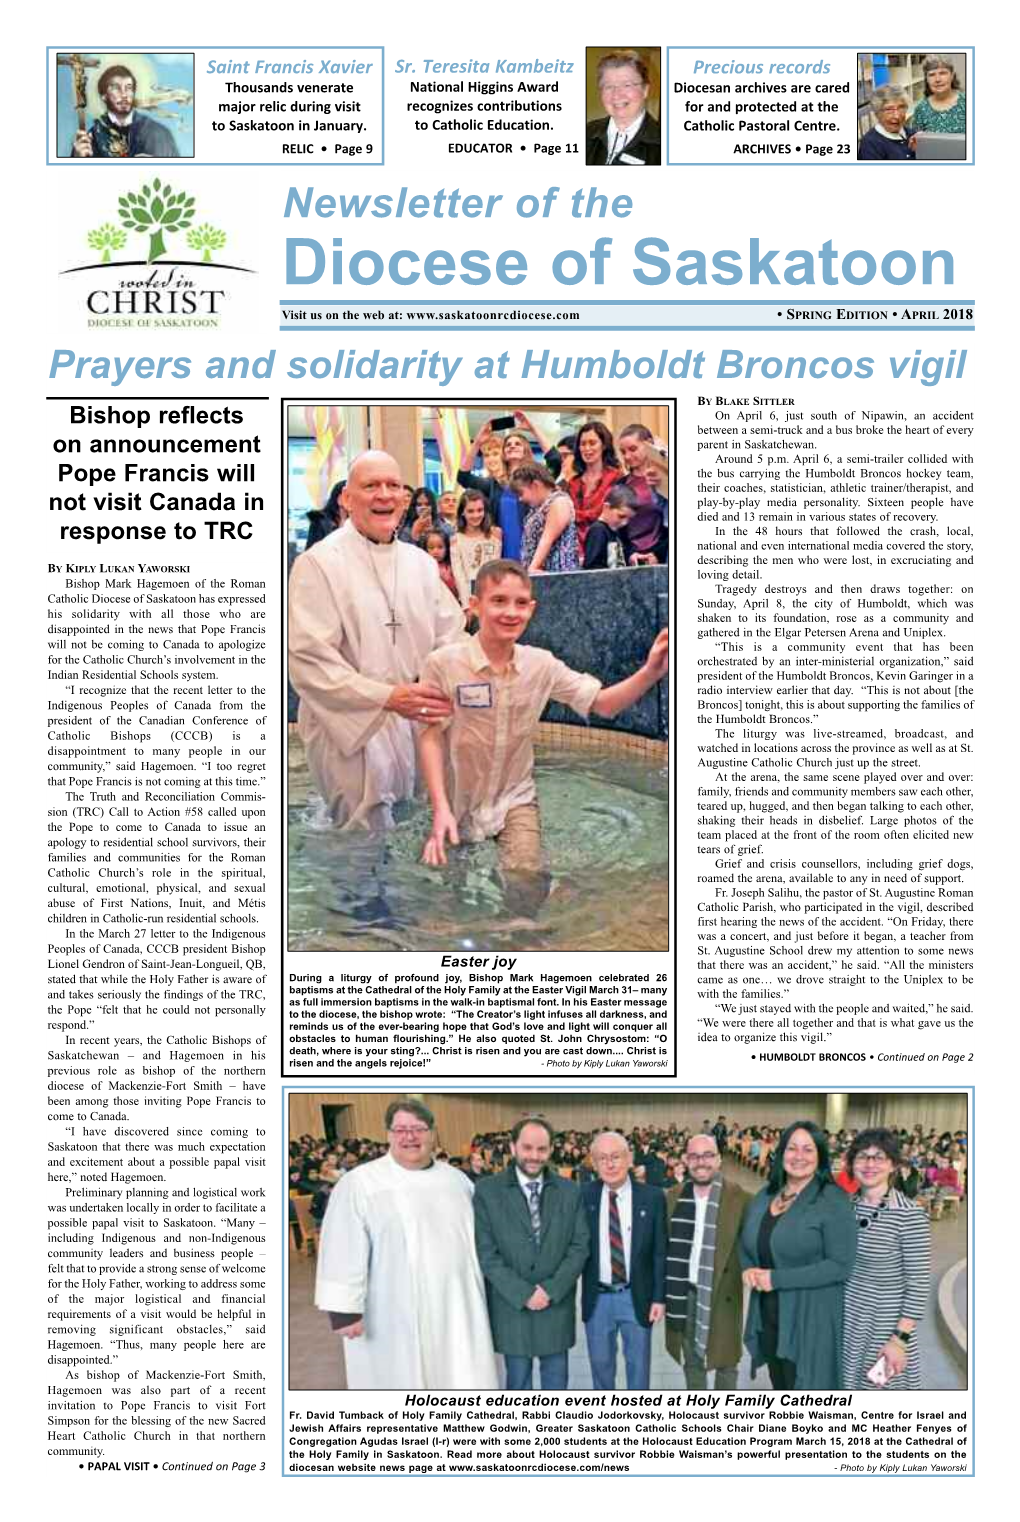 Diocesan Newsletter Is a Tabloid-Style Section C - Other Sources of News, Newspaper Published Twice a Year (Spring and Fall)